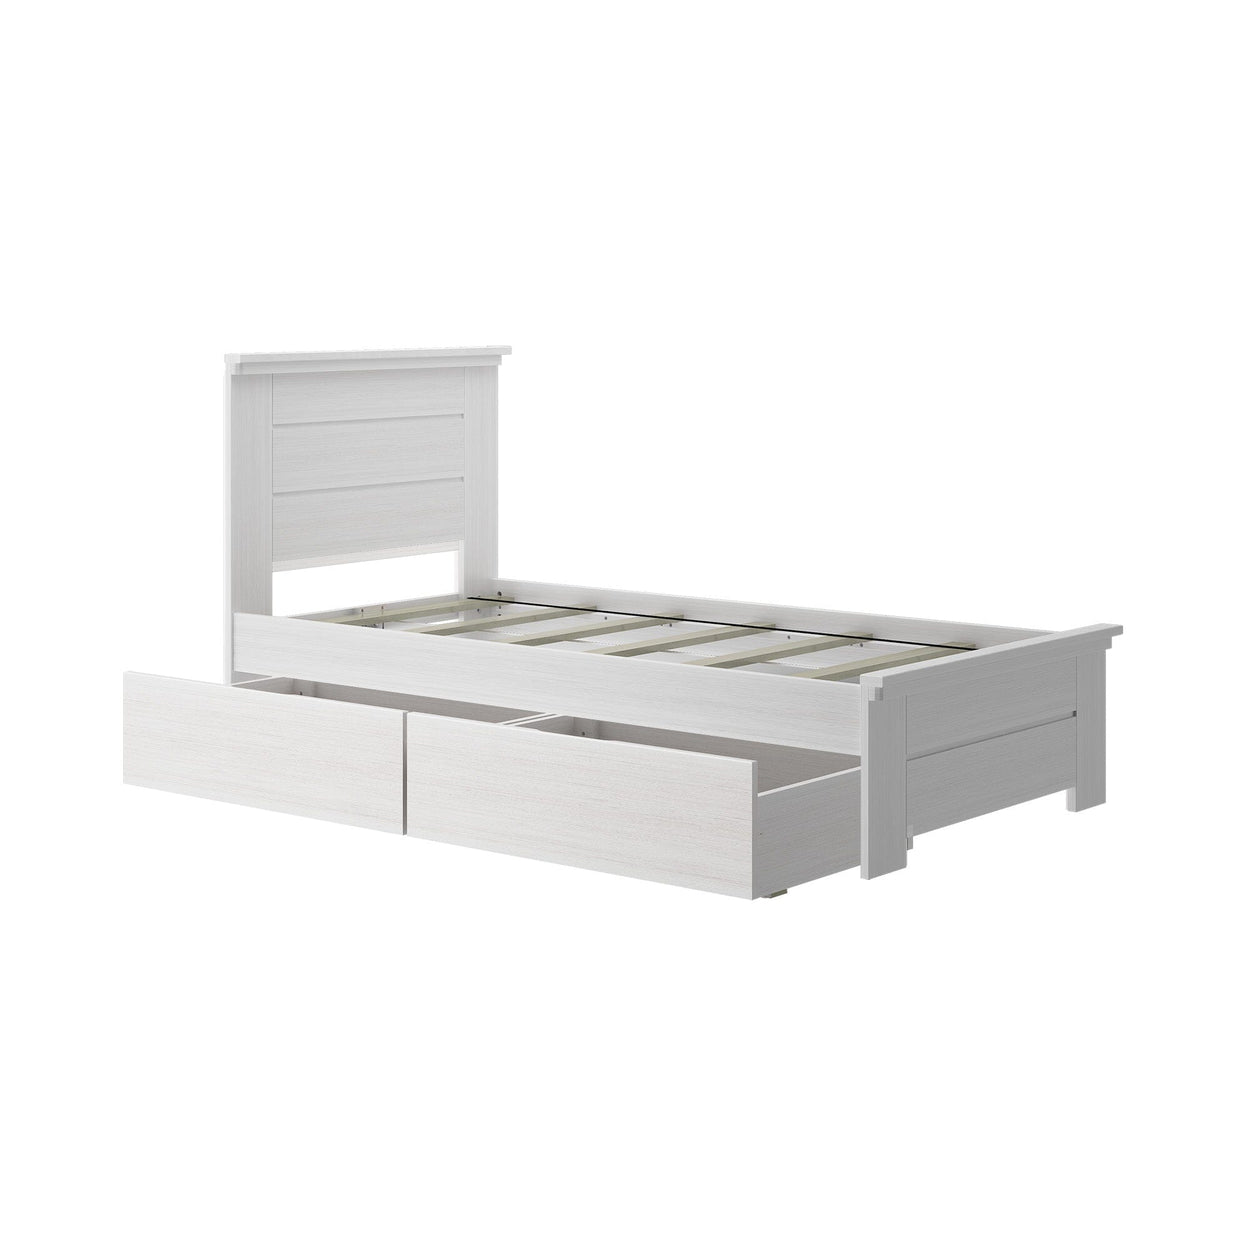 197220-182 : Kids Beds Farmhouse Twin Bed with Panel Headboard with Storage Drawers, White Wash